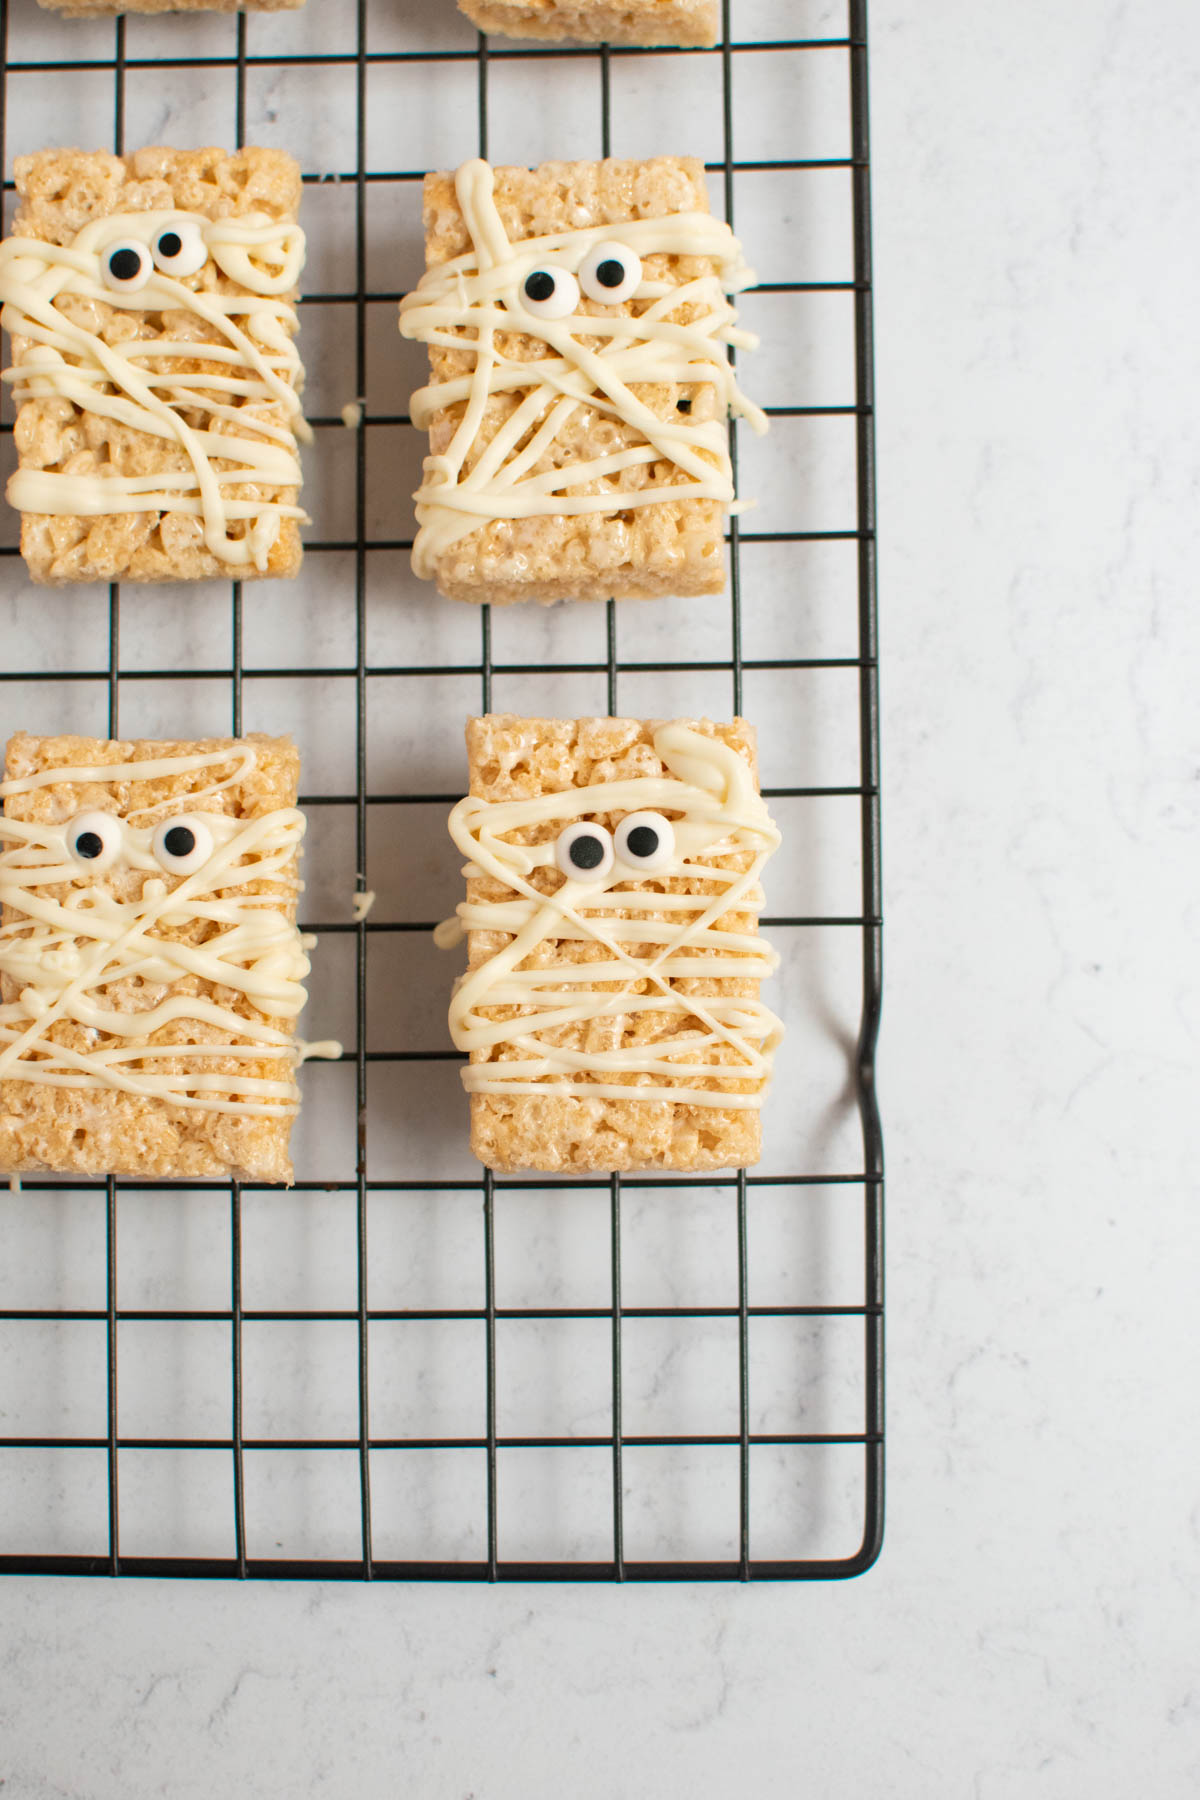 Mummy rice krispie treats with candy eyes on baking rack.